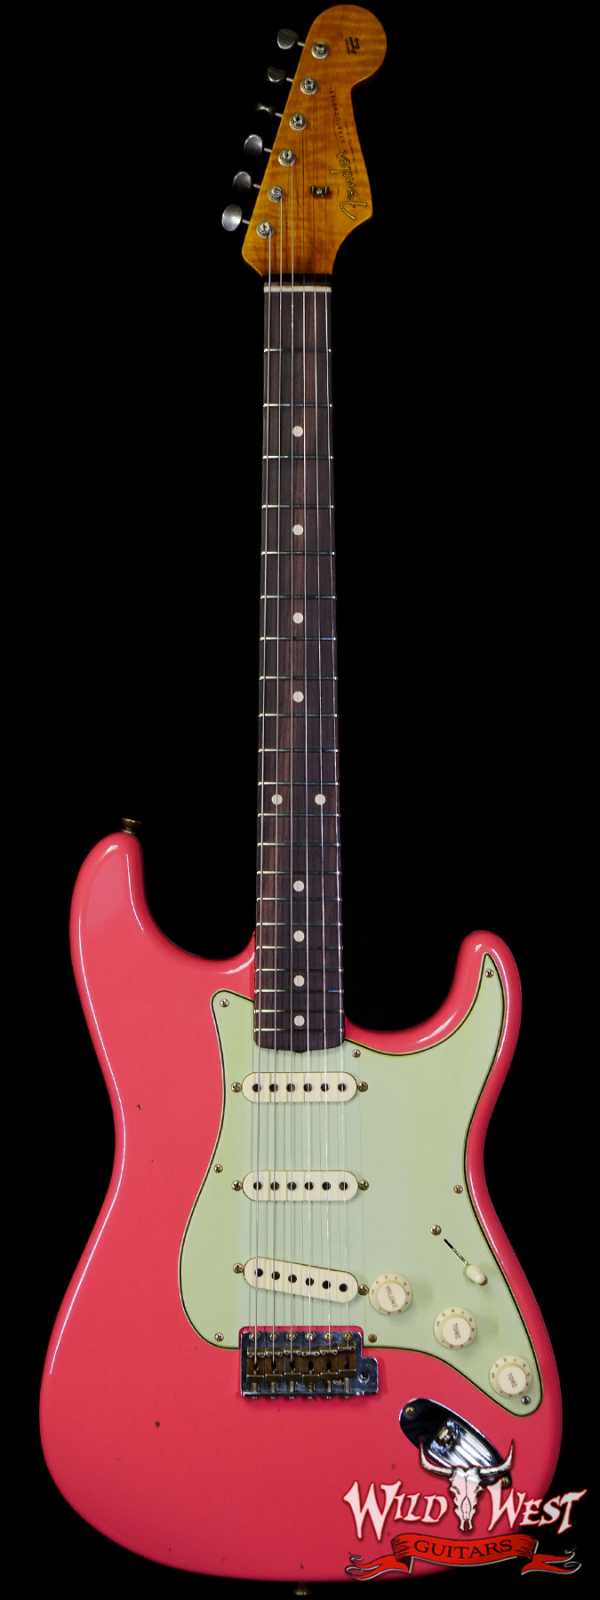 Fender Custom Shop Limited Edition 1959 59’ Special Stratocaster Flame Maple Neck Journeyman Relic Super Faded Fiesta Red